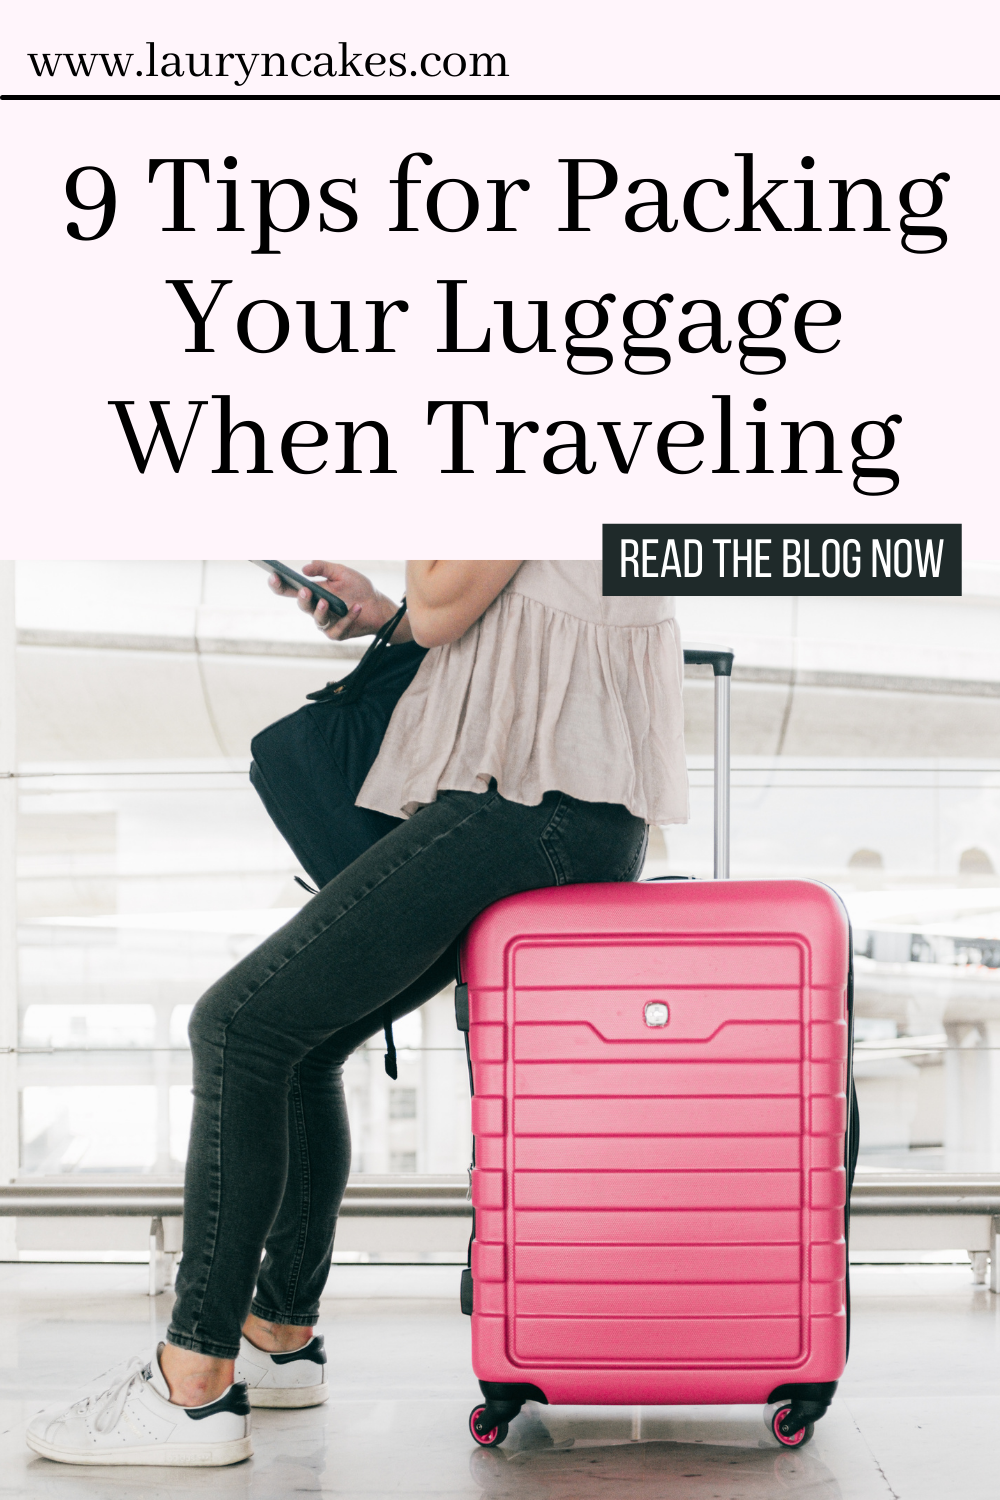 9 tips for packing your luggage when traveling